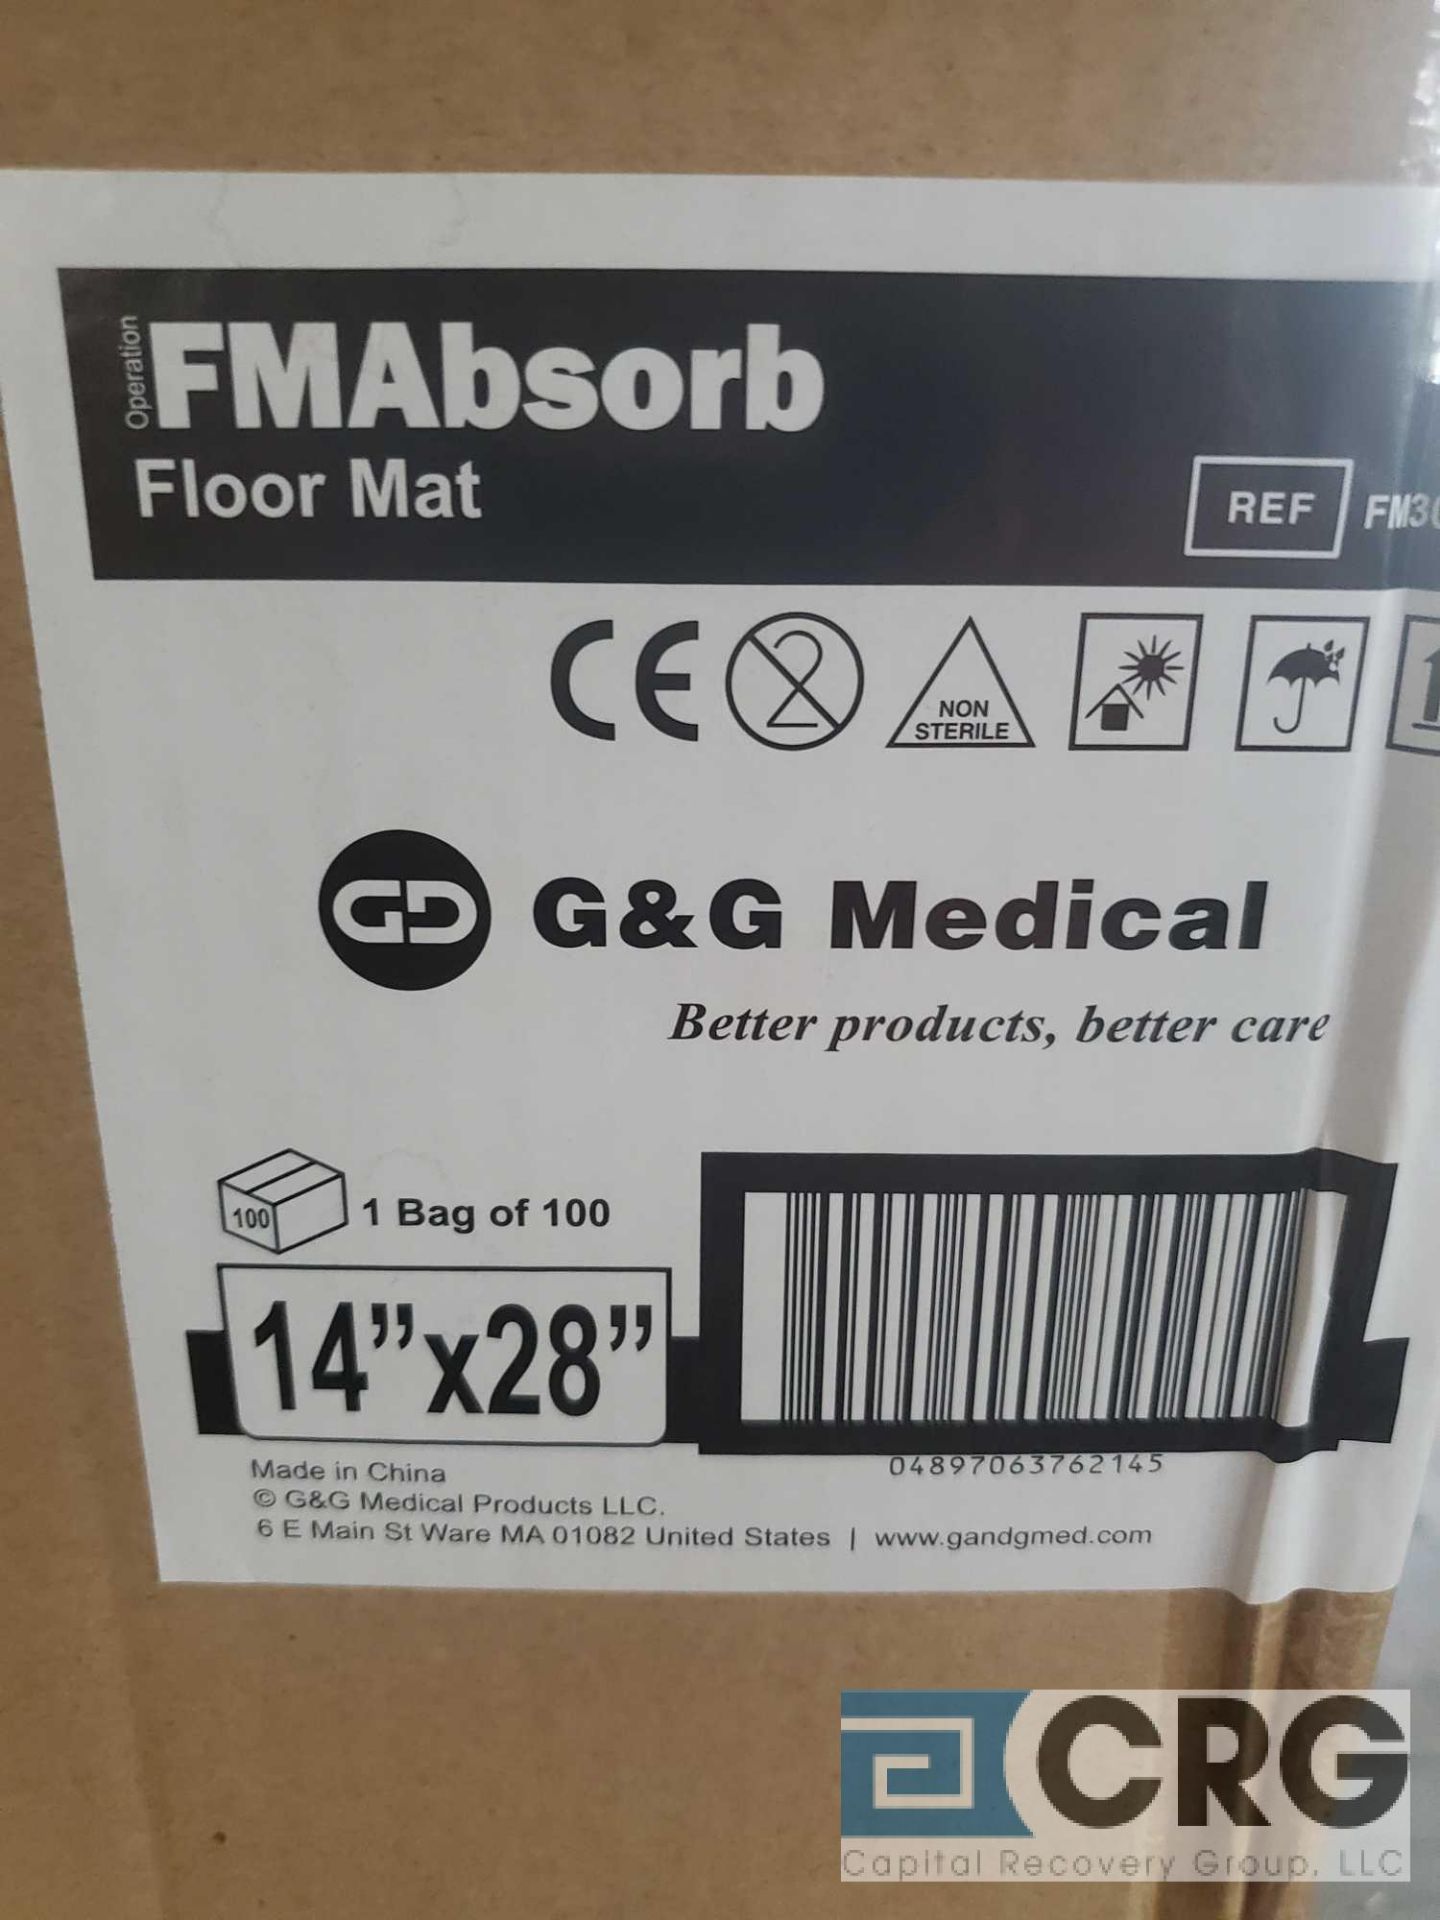 Lot of (18) cases FM-Absorb 14 X 28 inch floor mat, 100 ct case SUBJECT TO THE ENTIRETY BID LOT 250 - Image 3 of 3